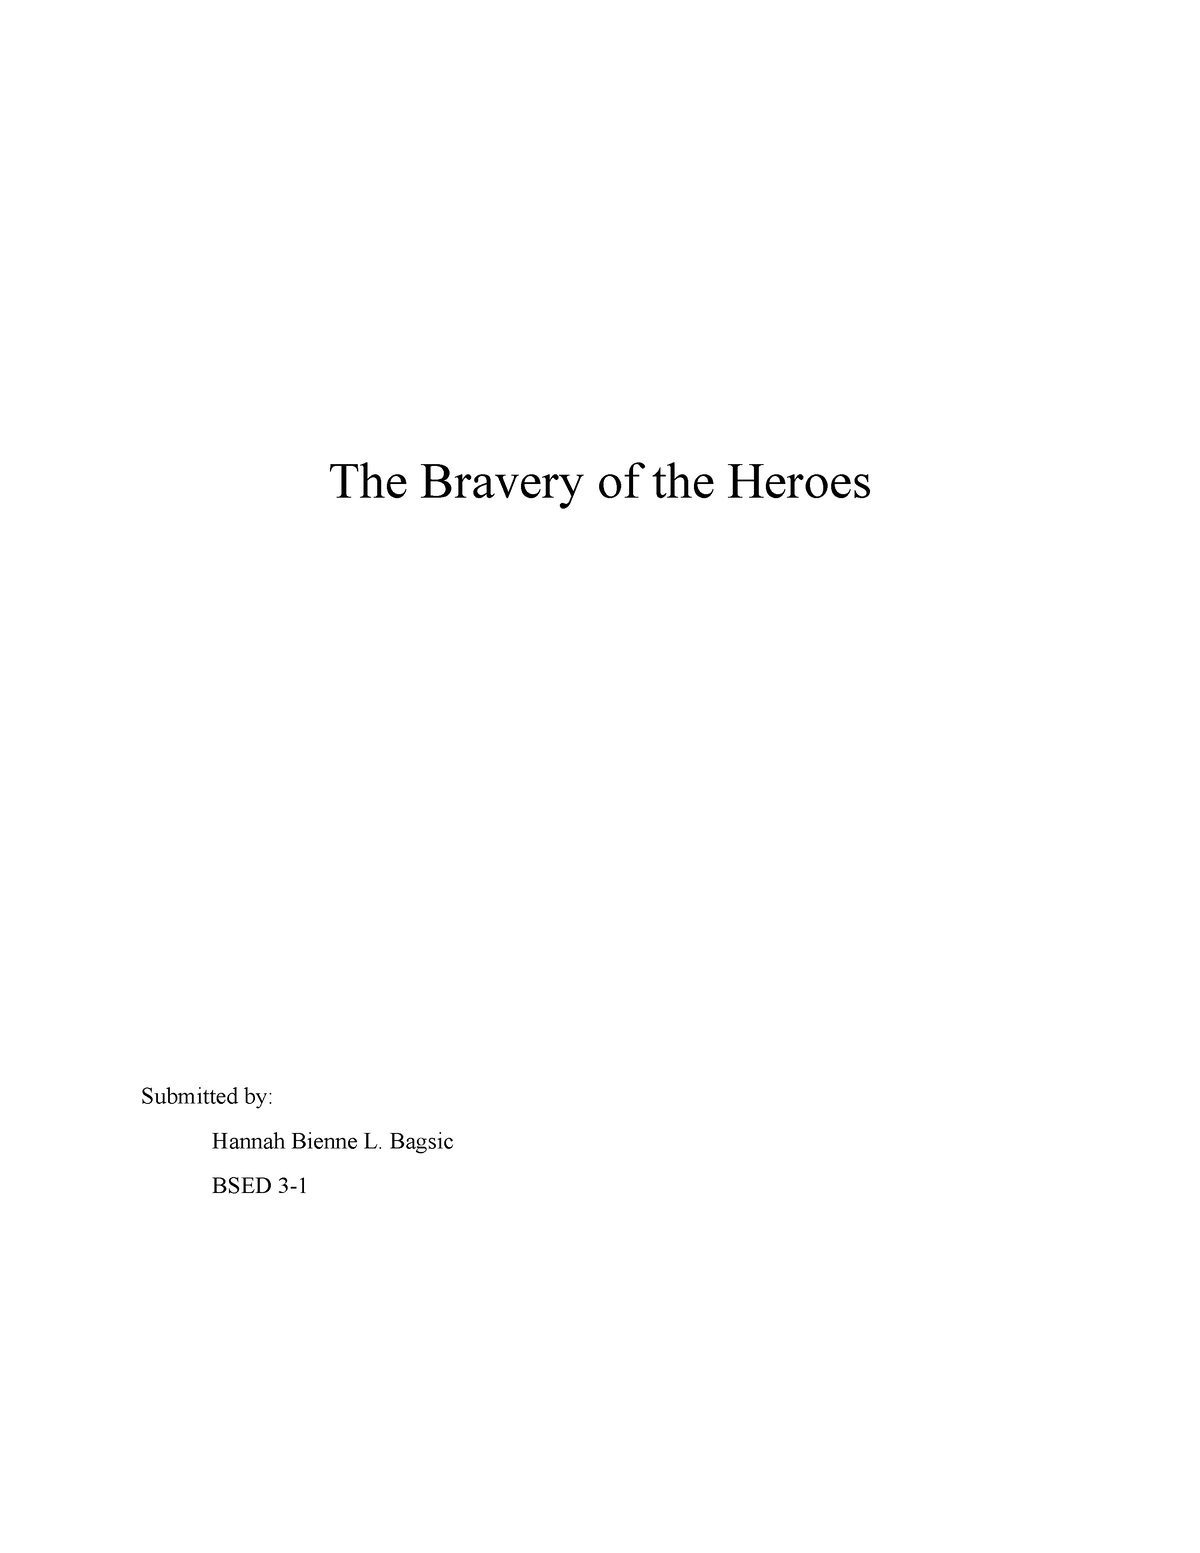 essay titles about bravery